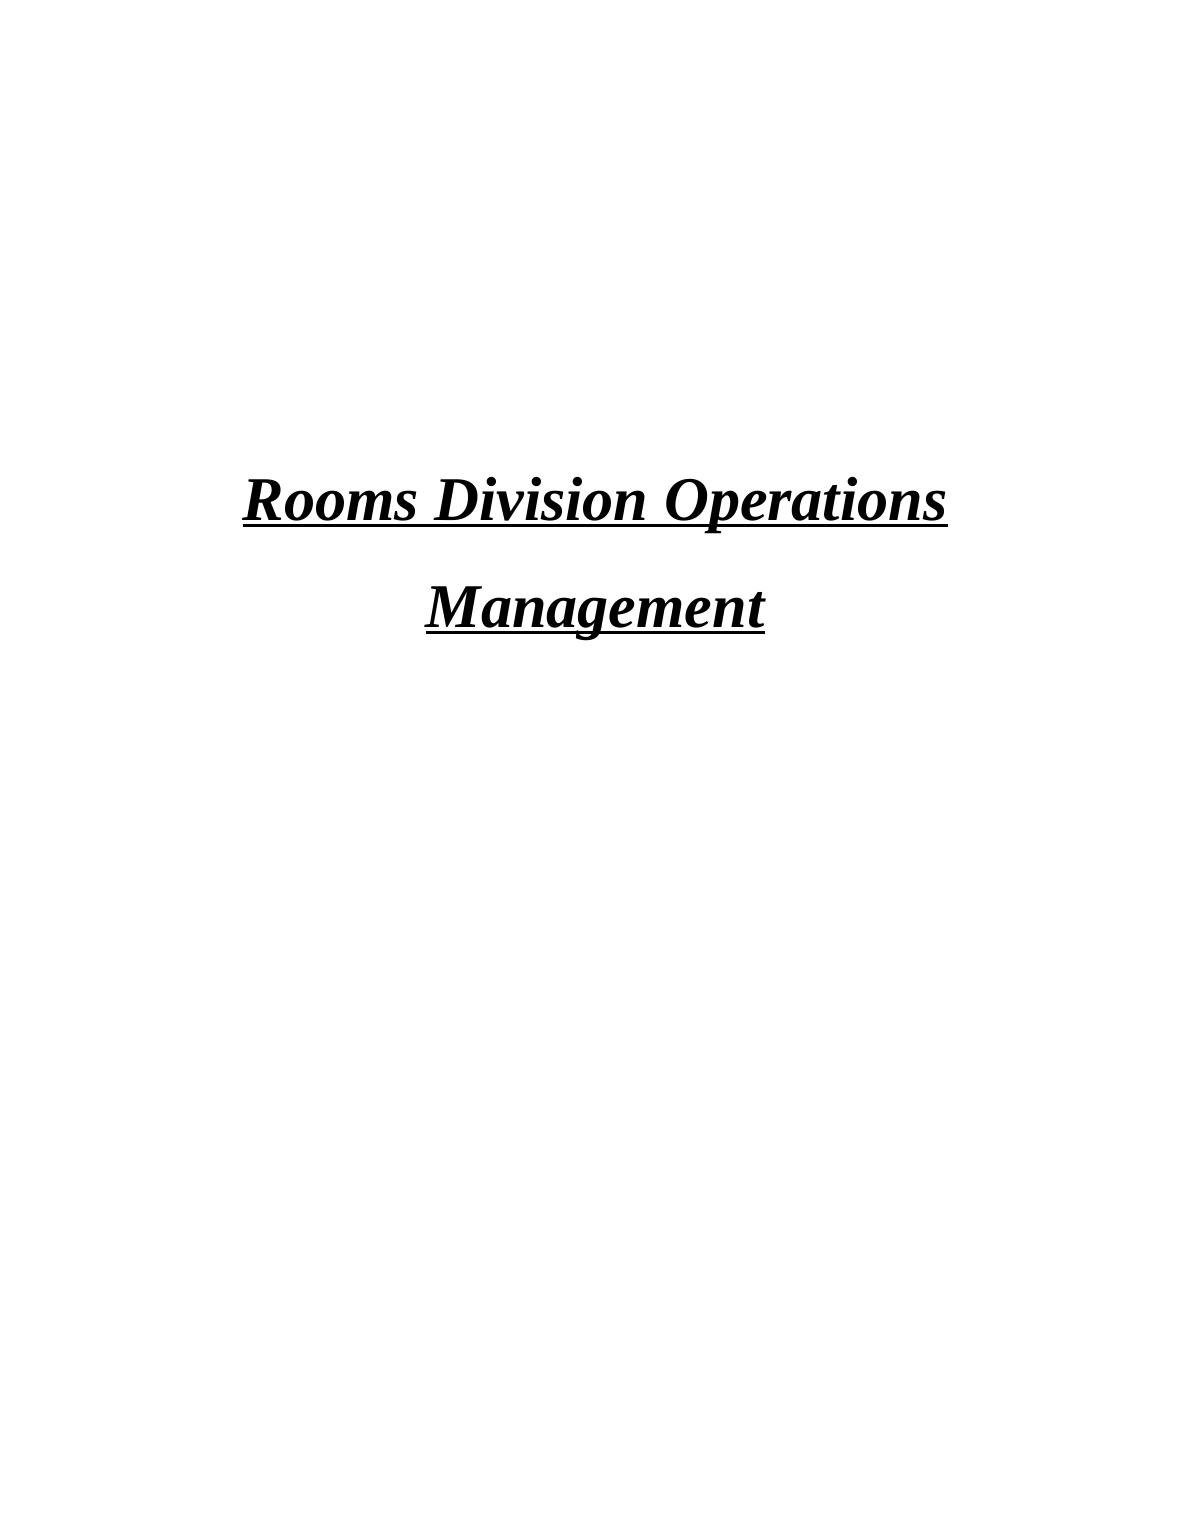 Rooms Division Operations Management Clientele Hotel_1